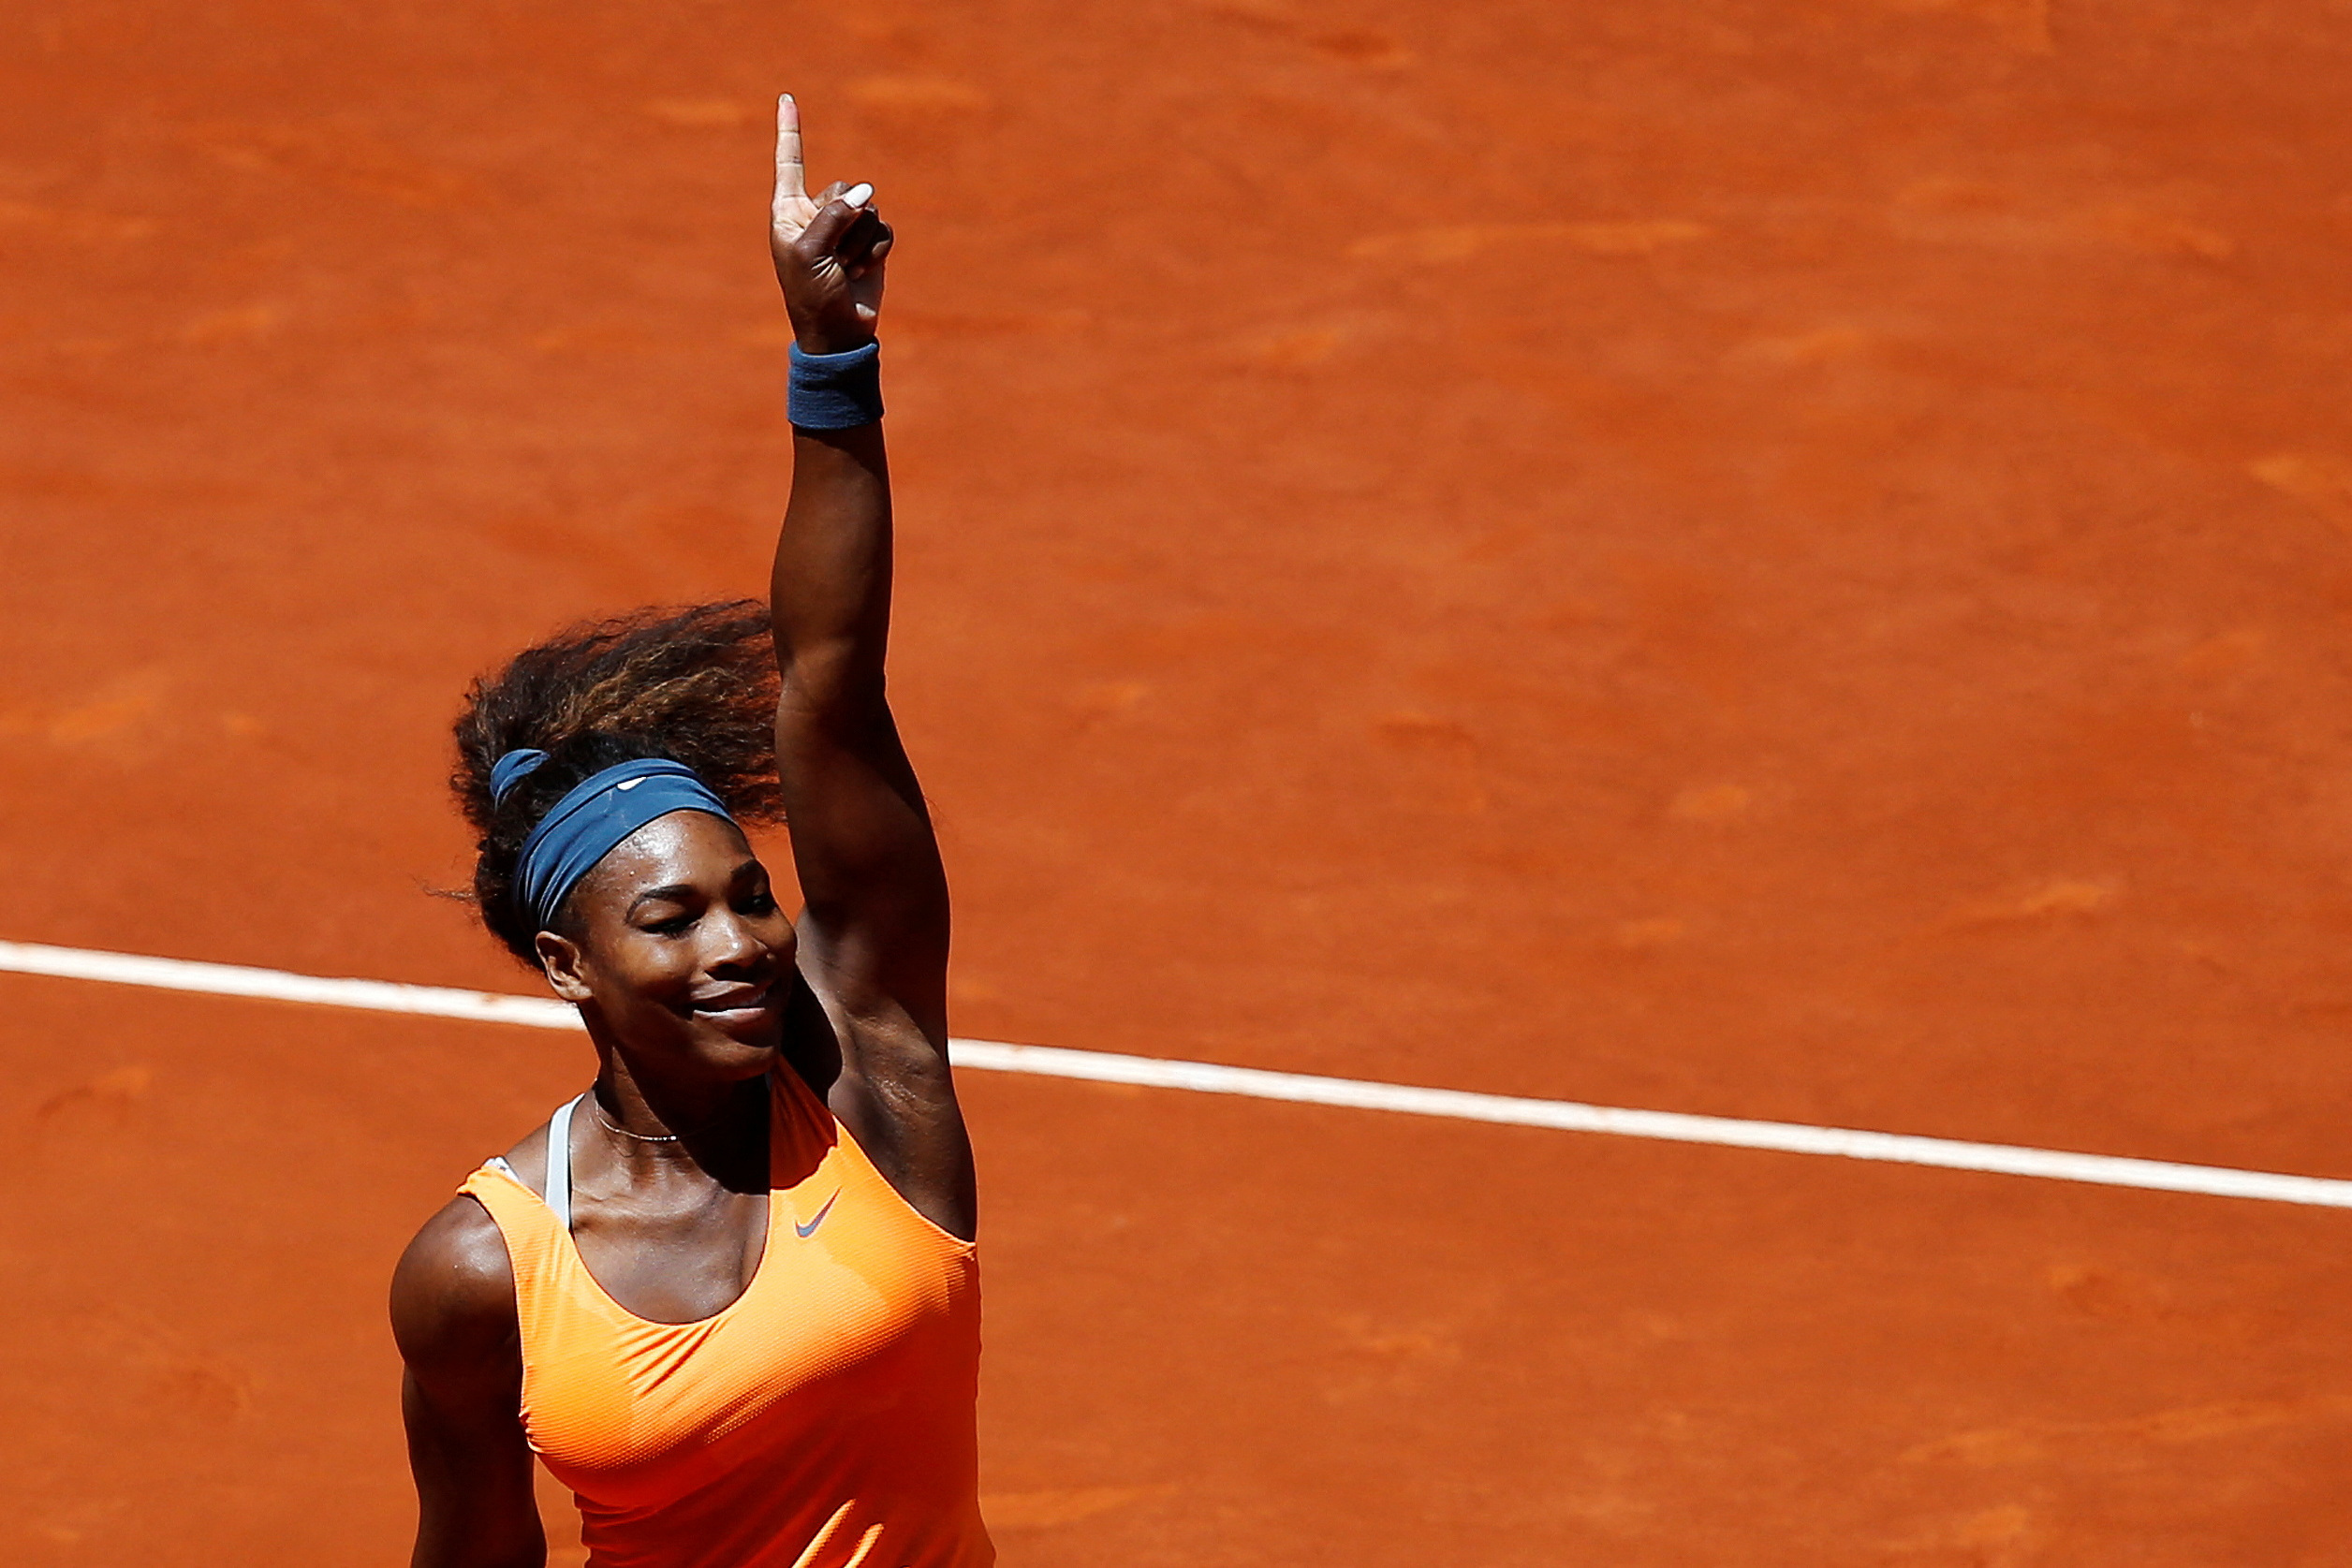 FILE PHOTO: Serena Williams of the U.S. celebrates her victory against Maria Sharapova of Russia at the end of their women's singles final match at the Madrid Open tennis tournament in Madrid May 12, 2013.